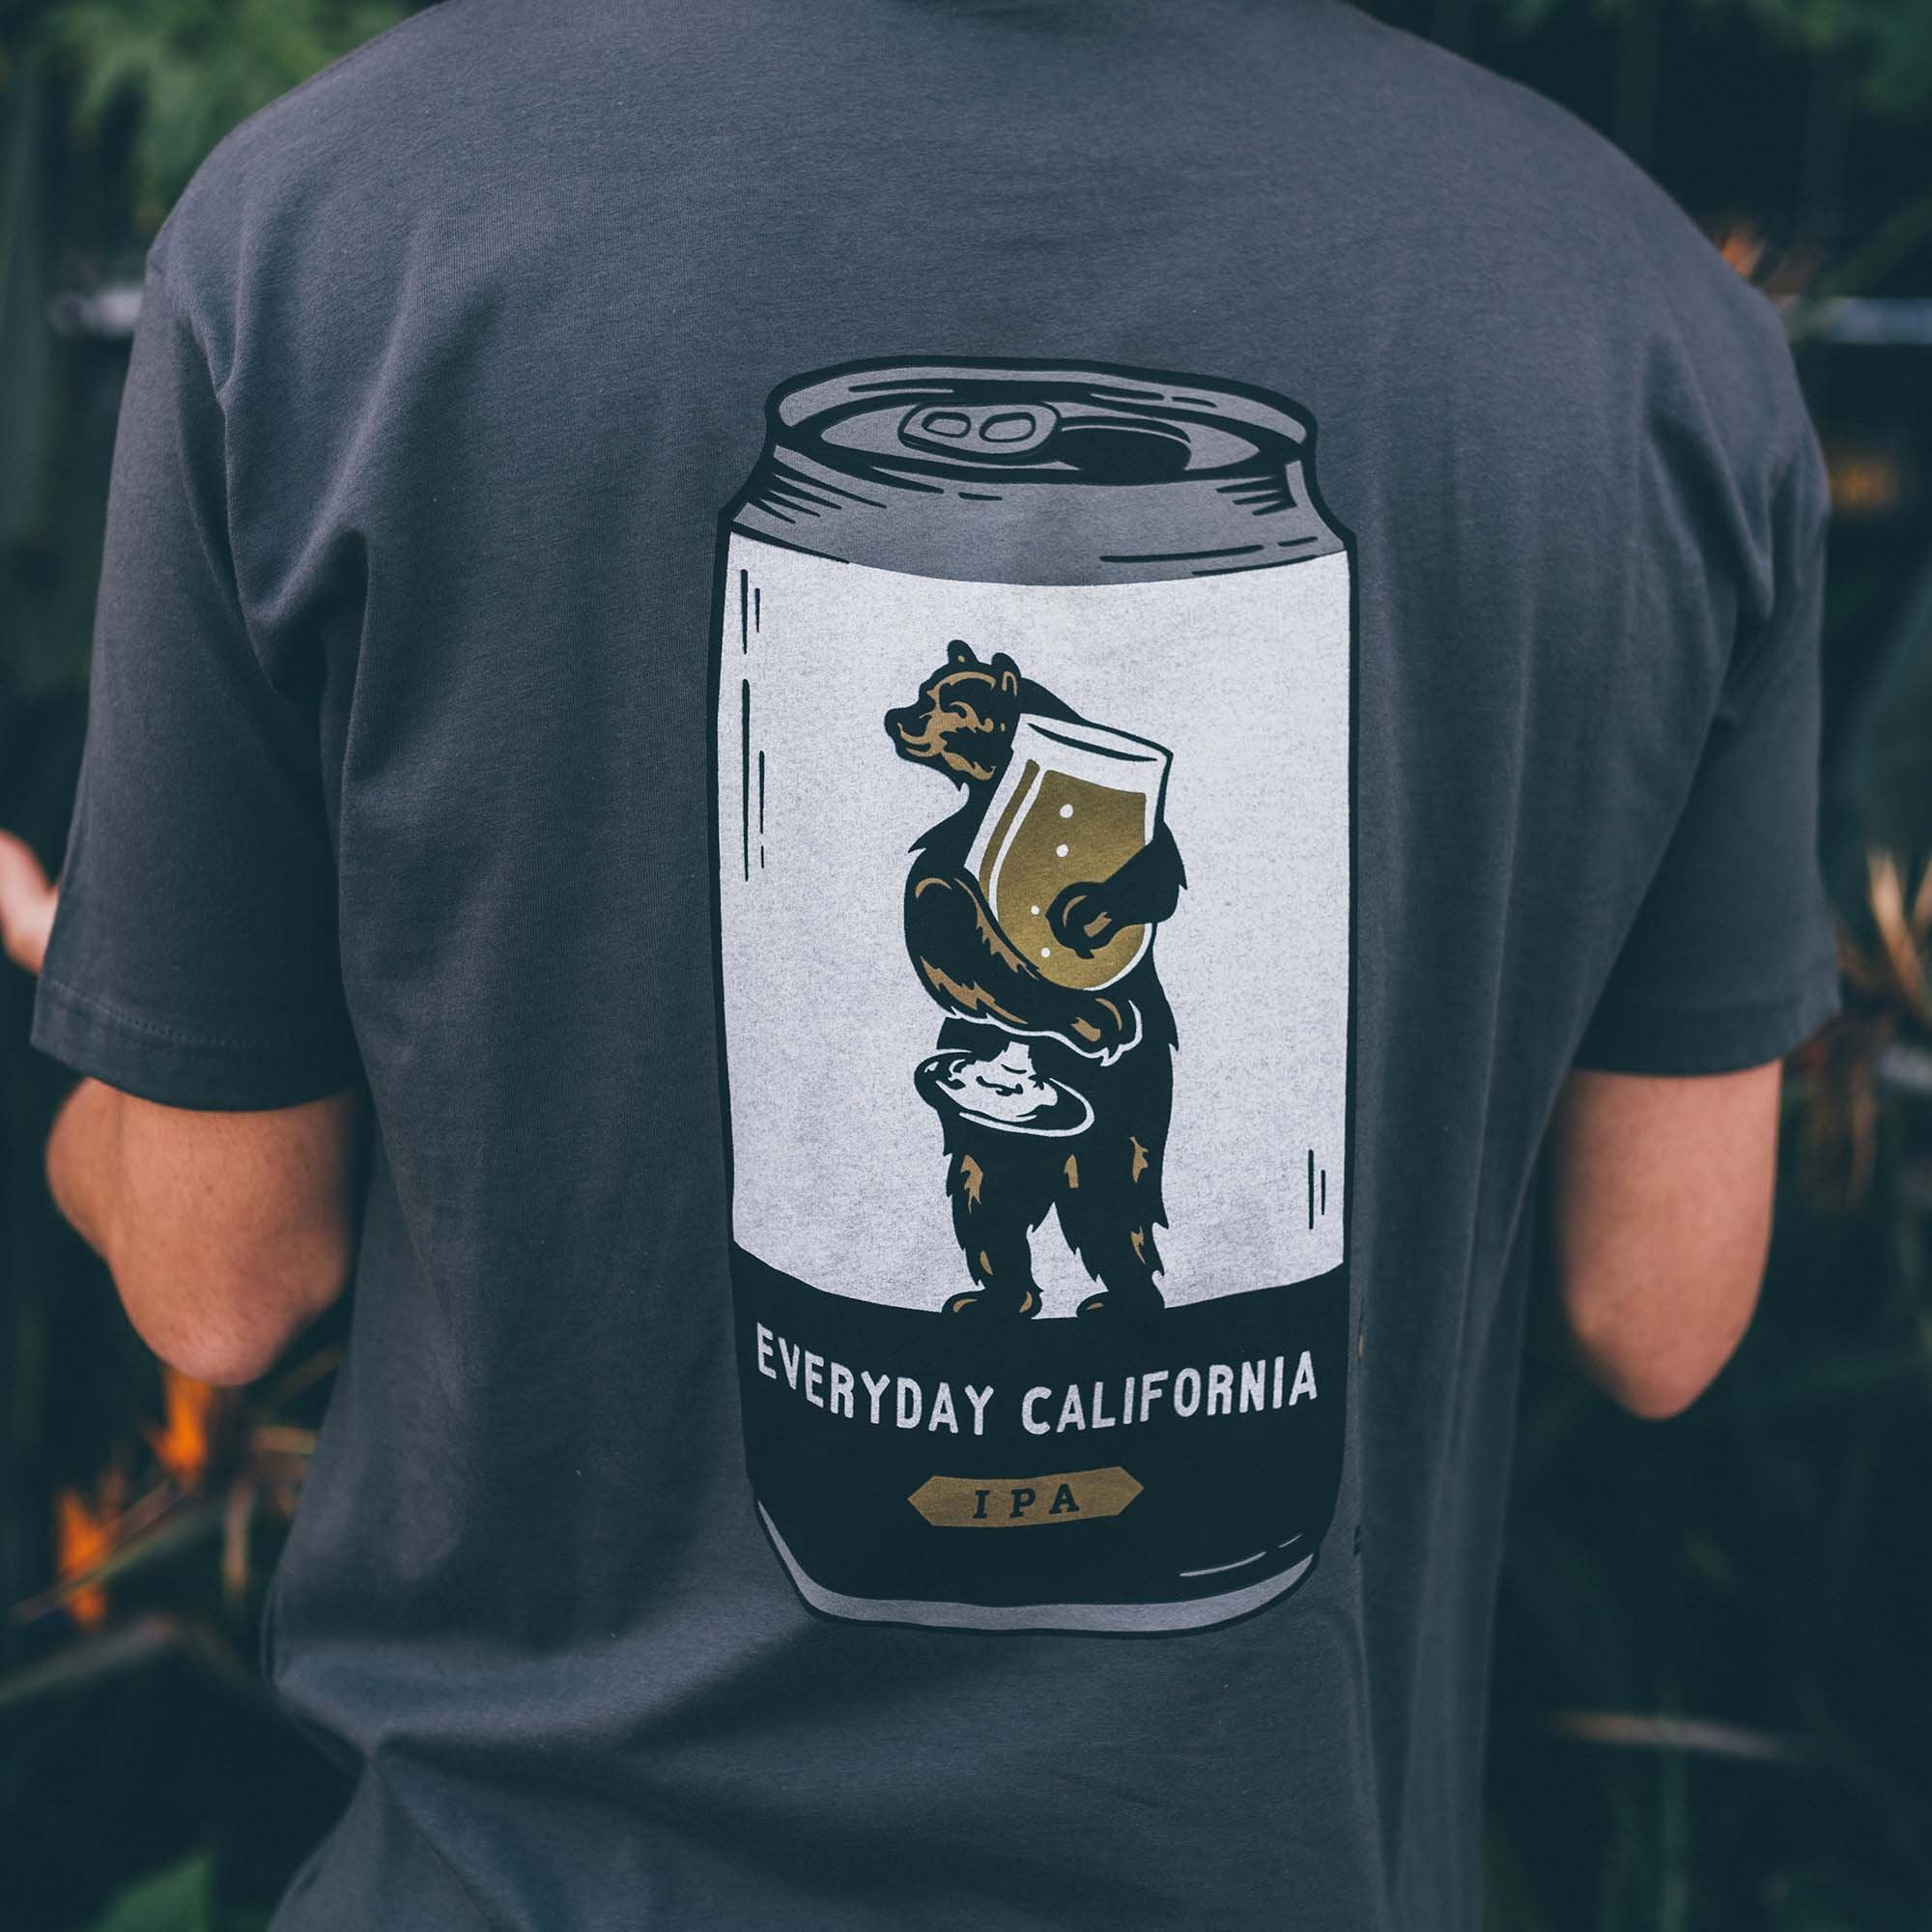 Brewmaster Heavy MetalEveryday California Brewmaster Tee - grey tee with back graphic featuring Brutus the Bear logo holding a beer